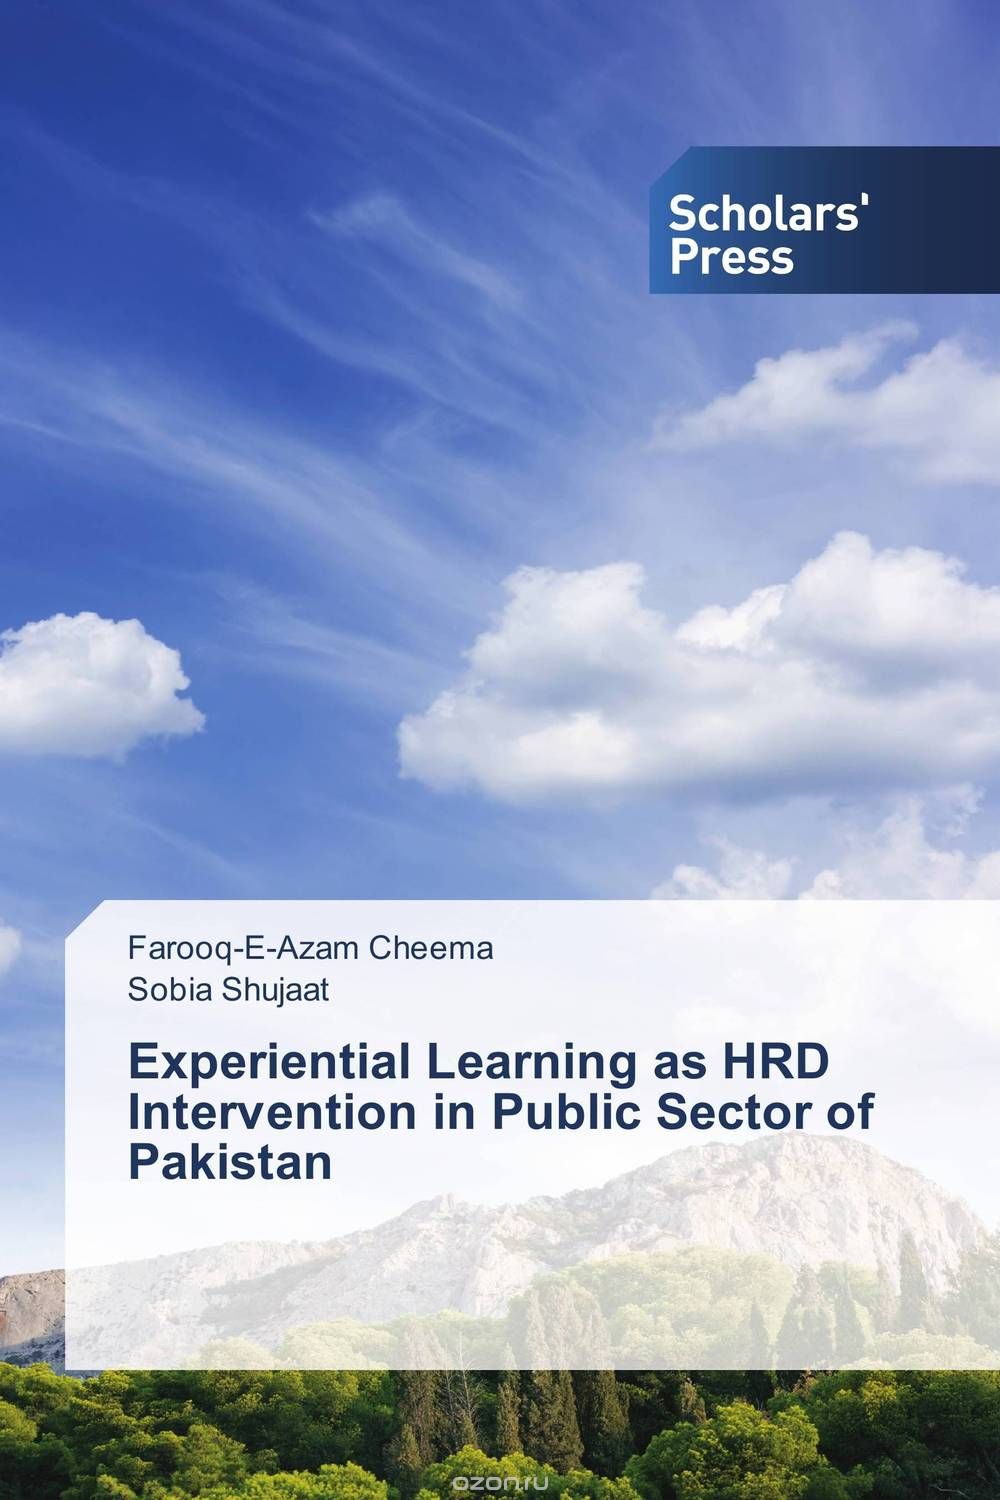 Скачать книгу "Experiential Learning as HRD Intervention in Public Sector of Pakistan"